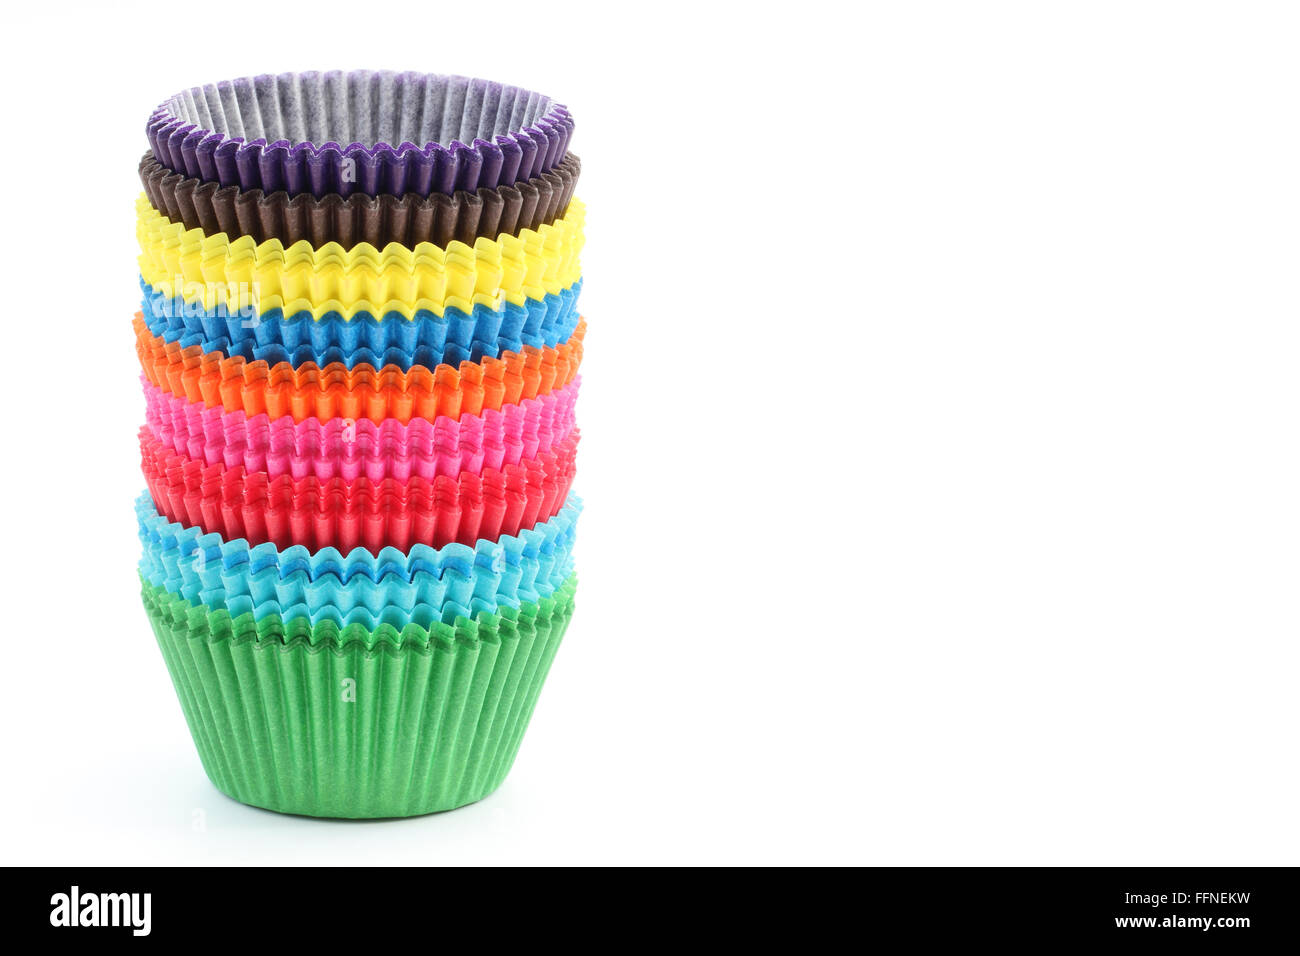 A stack of colorful baking cases on an isolated white background. Stock Photo